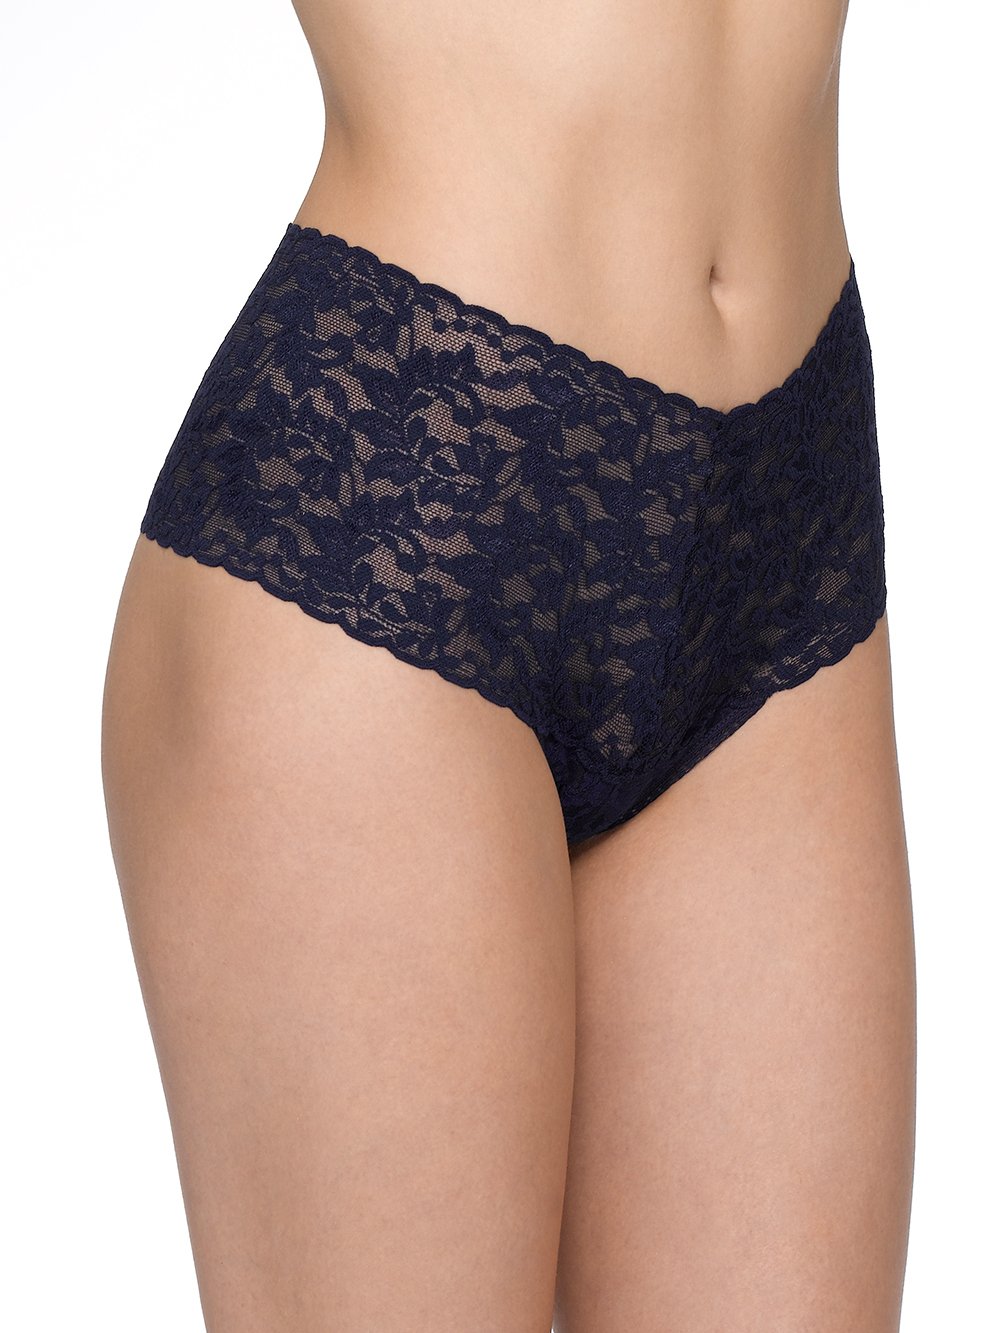 Hanky Panky Thong Navy / One Size Retro Lace Thong